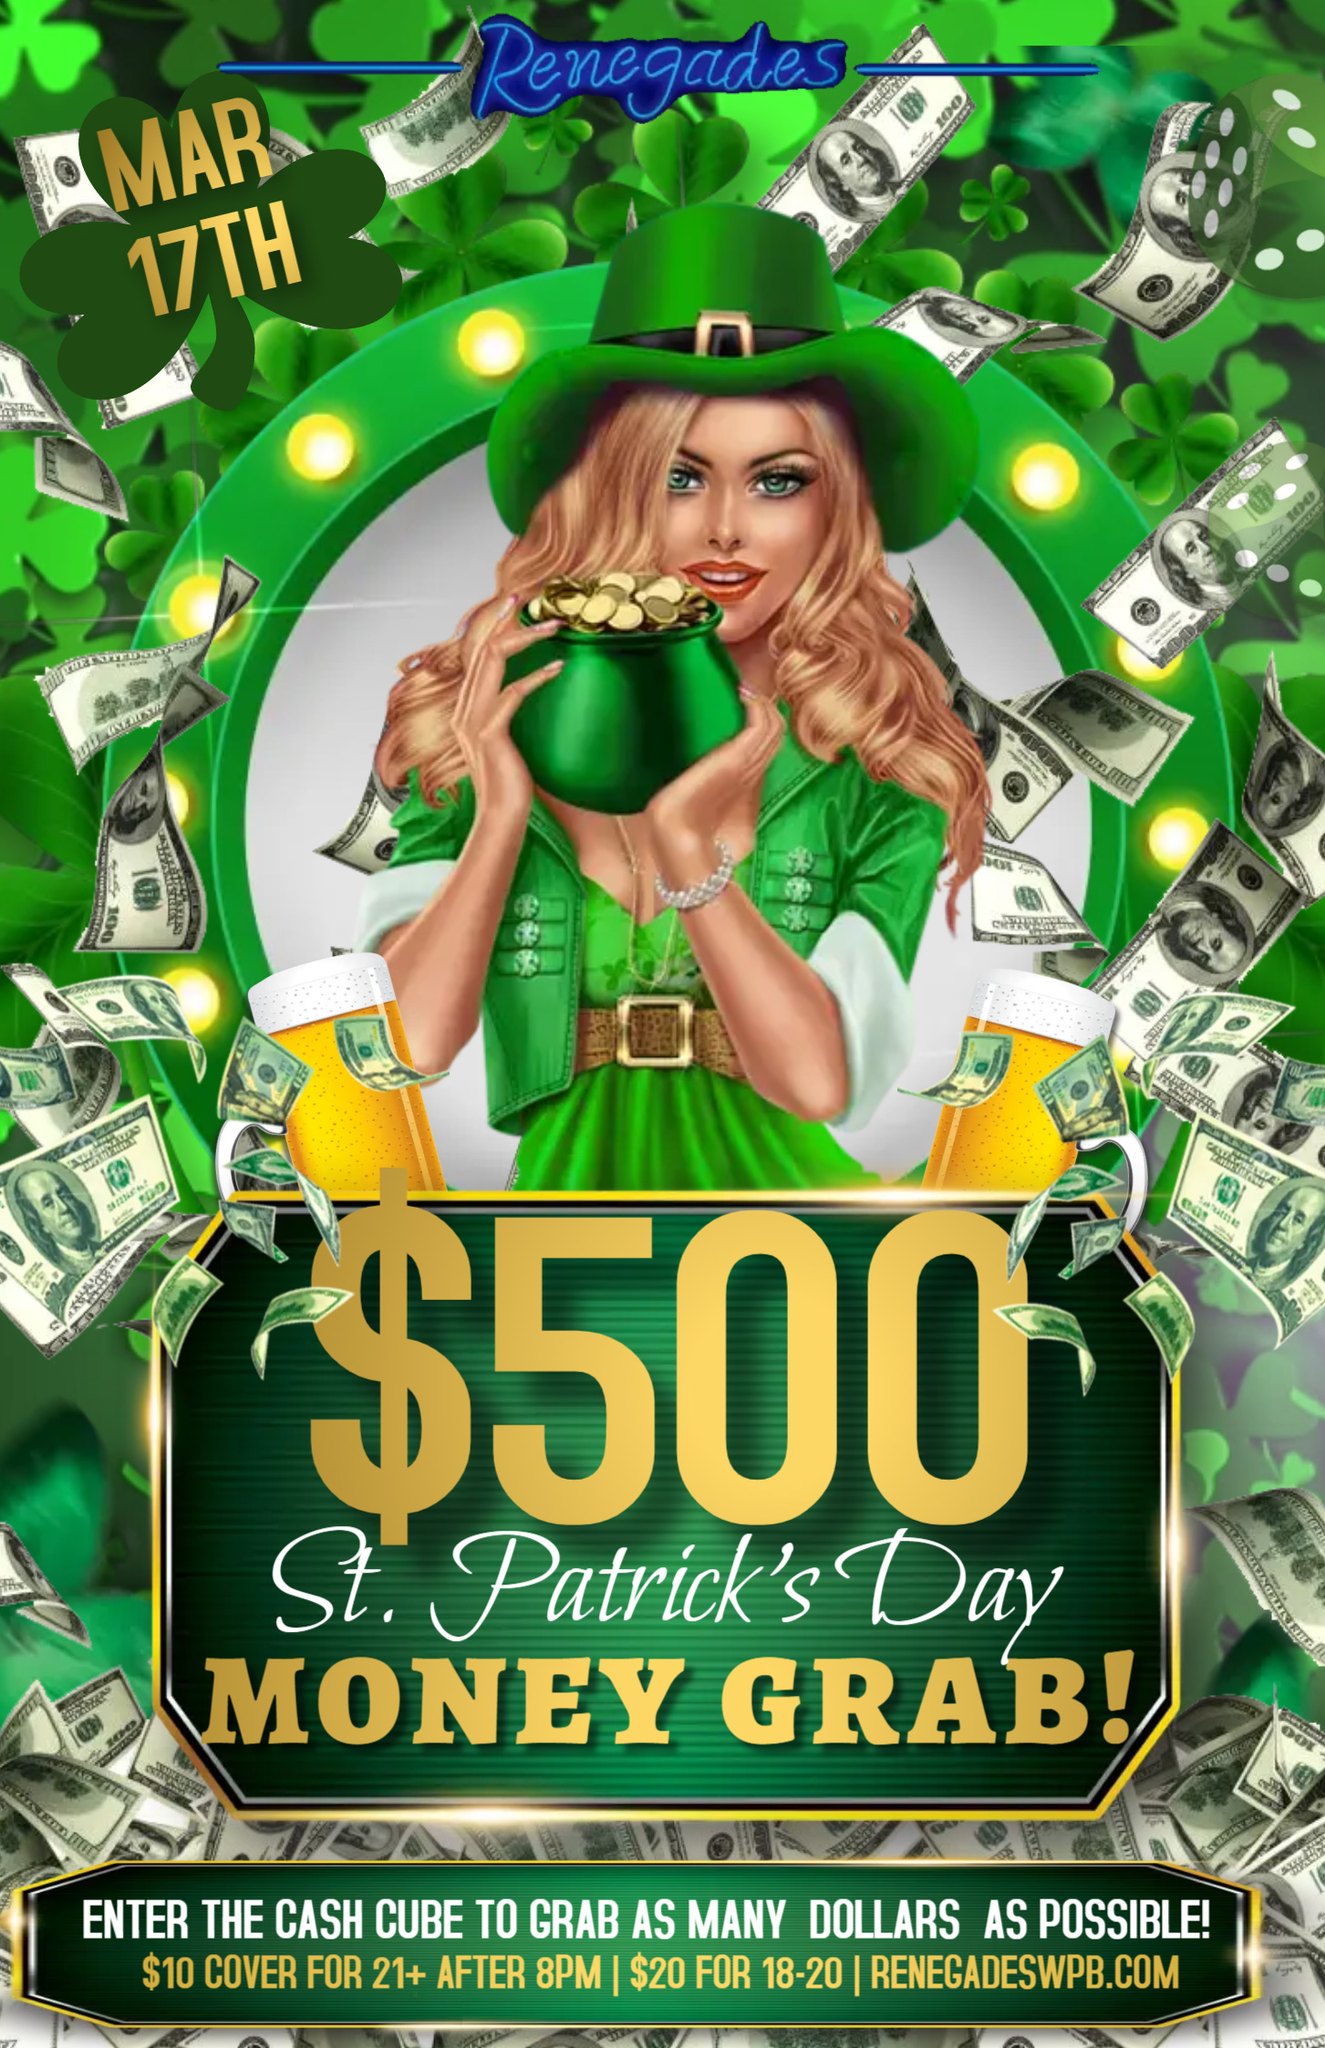 $500 St. Patrick's Day Money Grab at Renegades - West Palm Beach